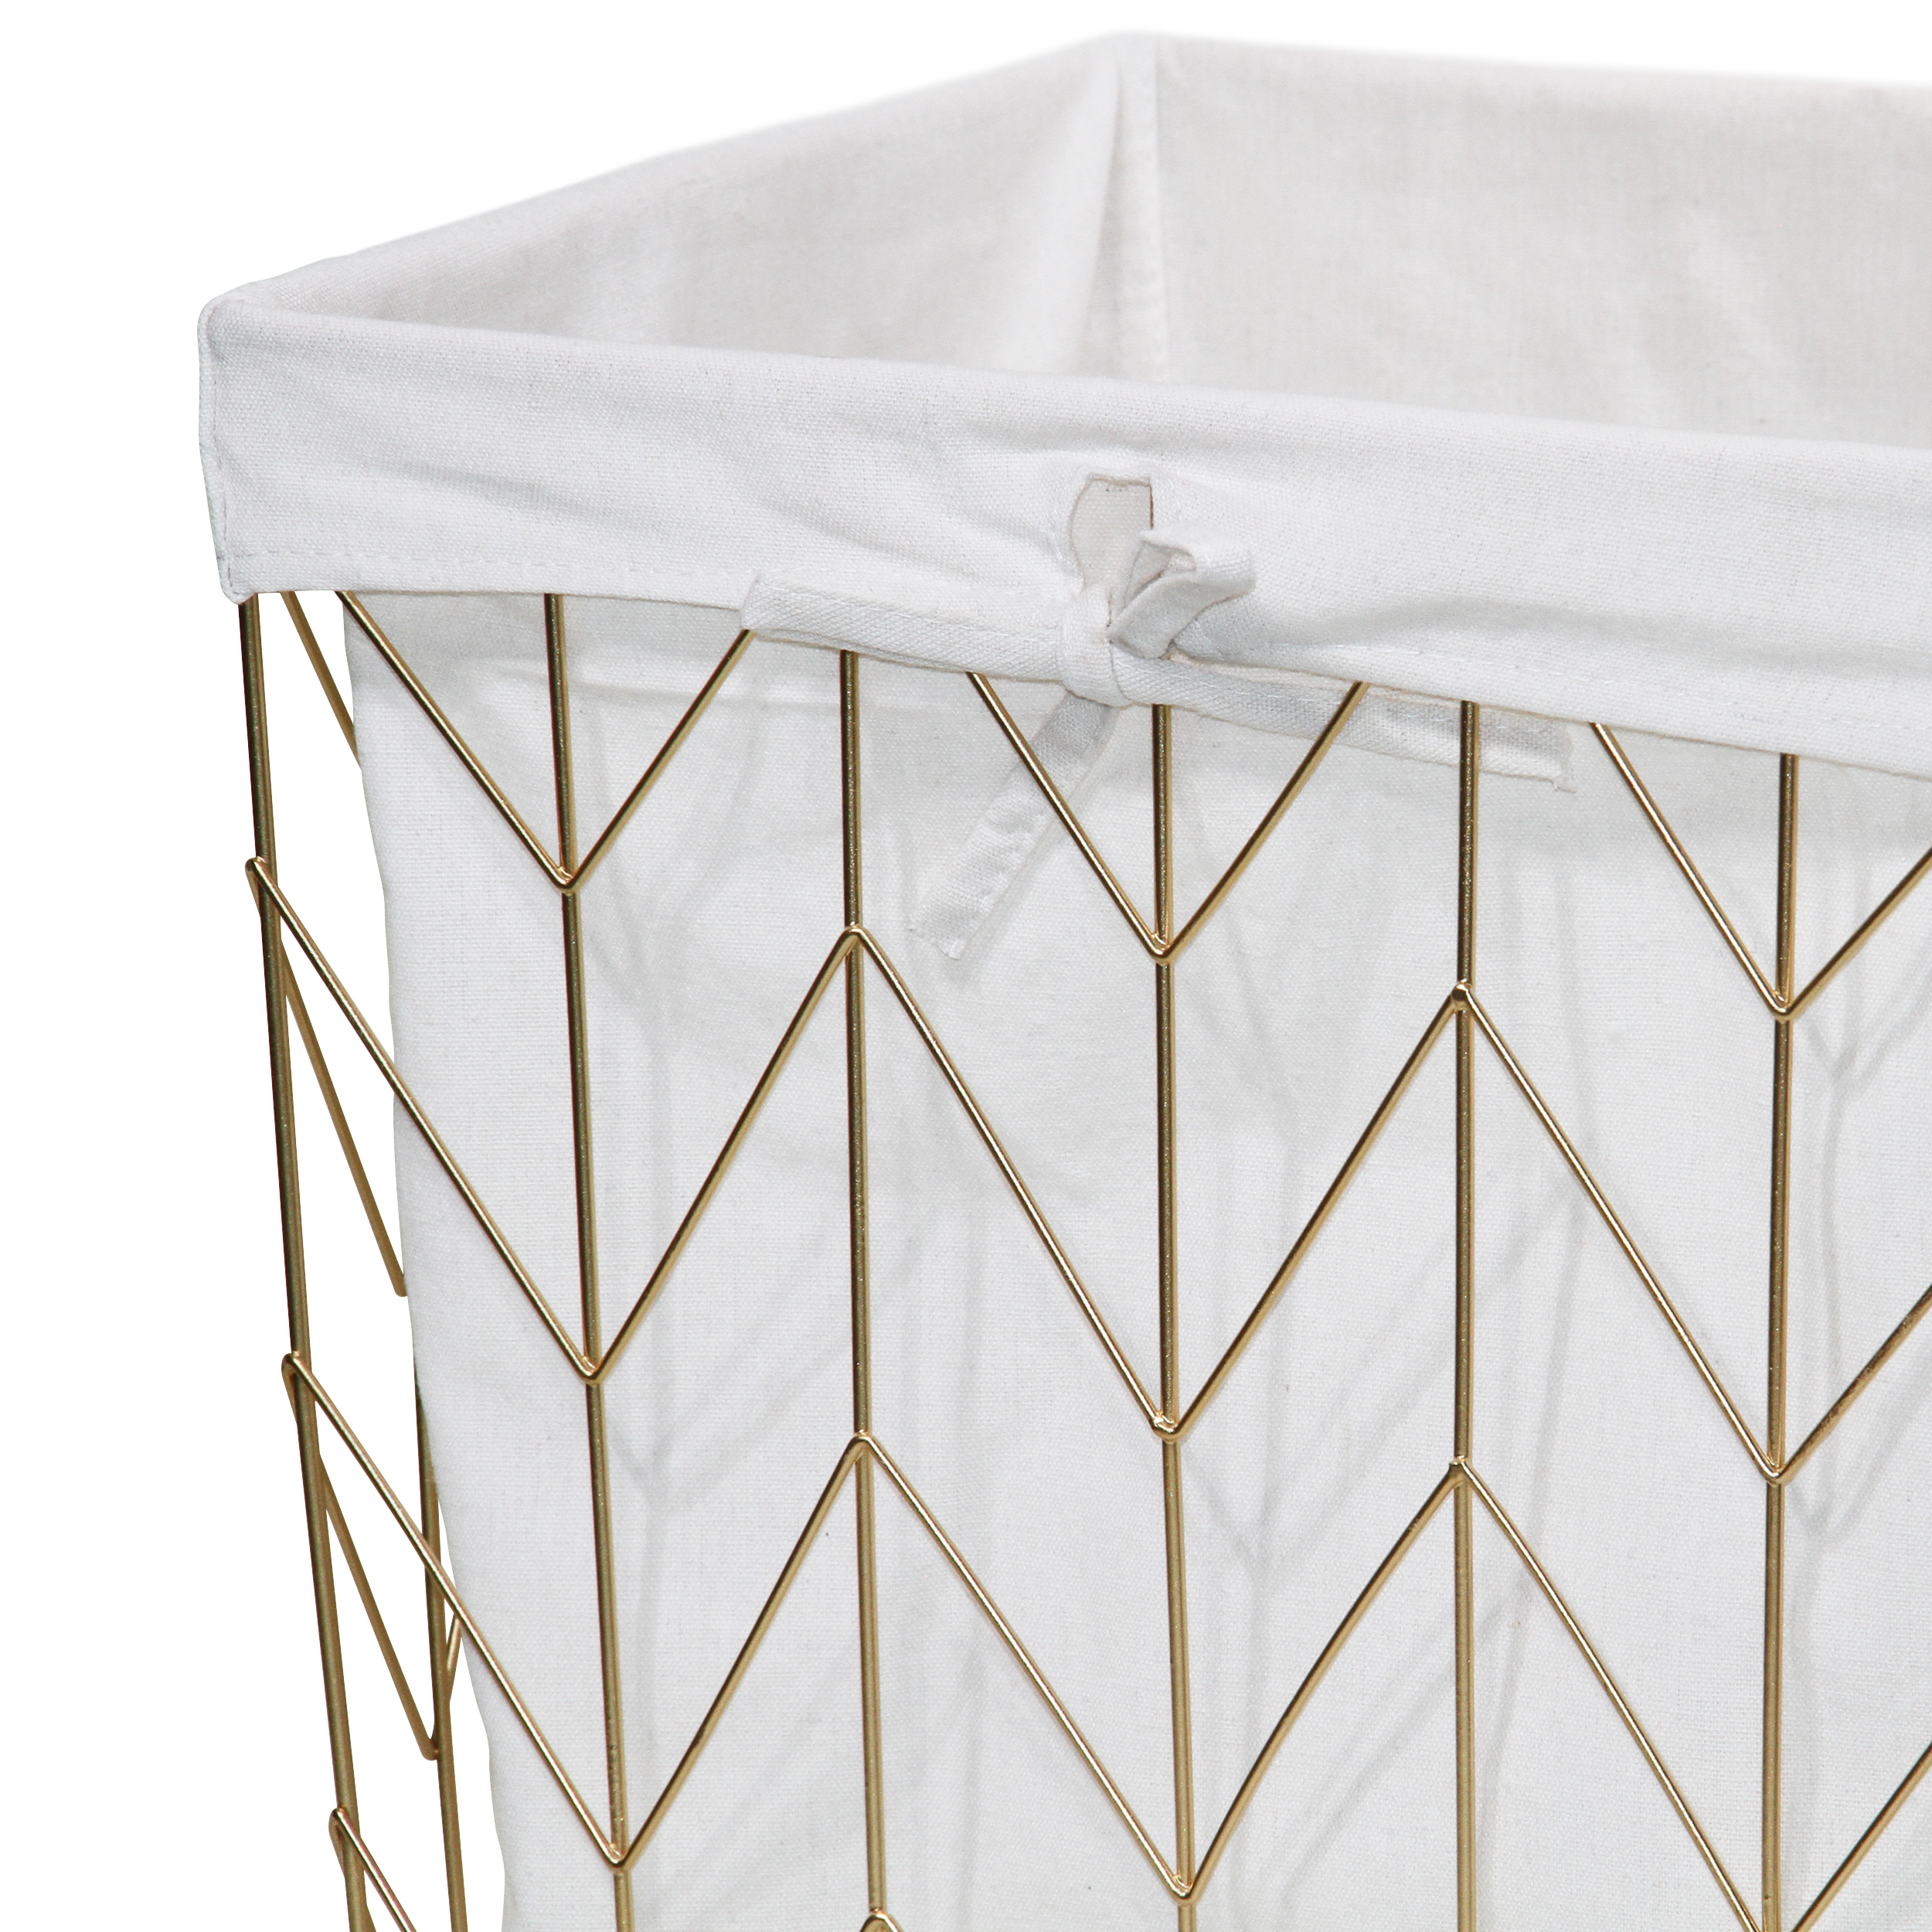 Mainstays Square Chevron Pattern Metal Laundry Hamper with Wheels, Gold & Natural - image 2 of 3